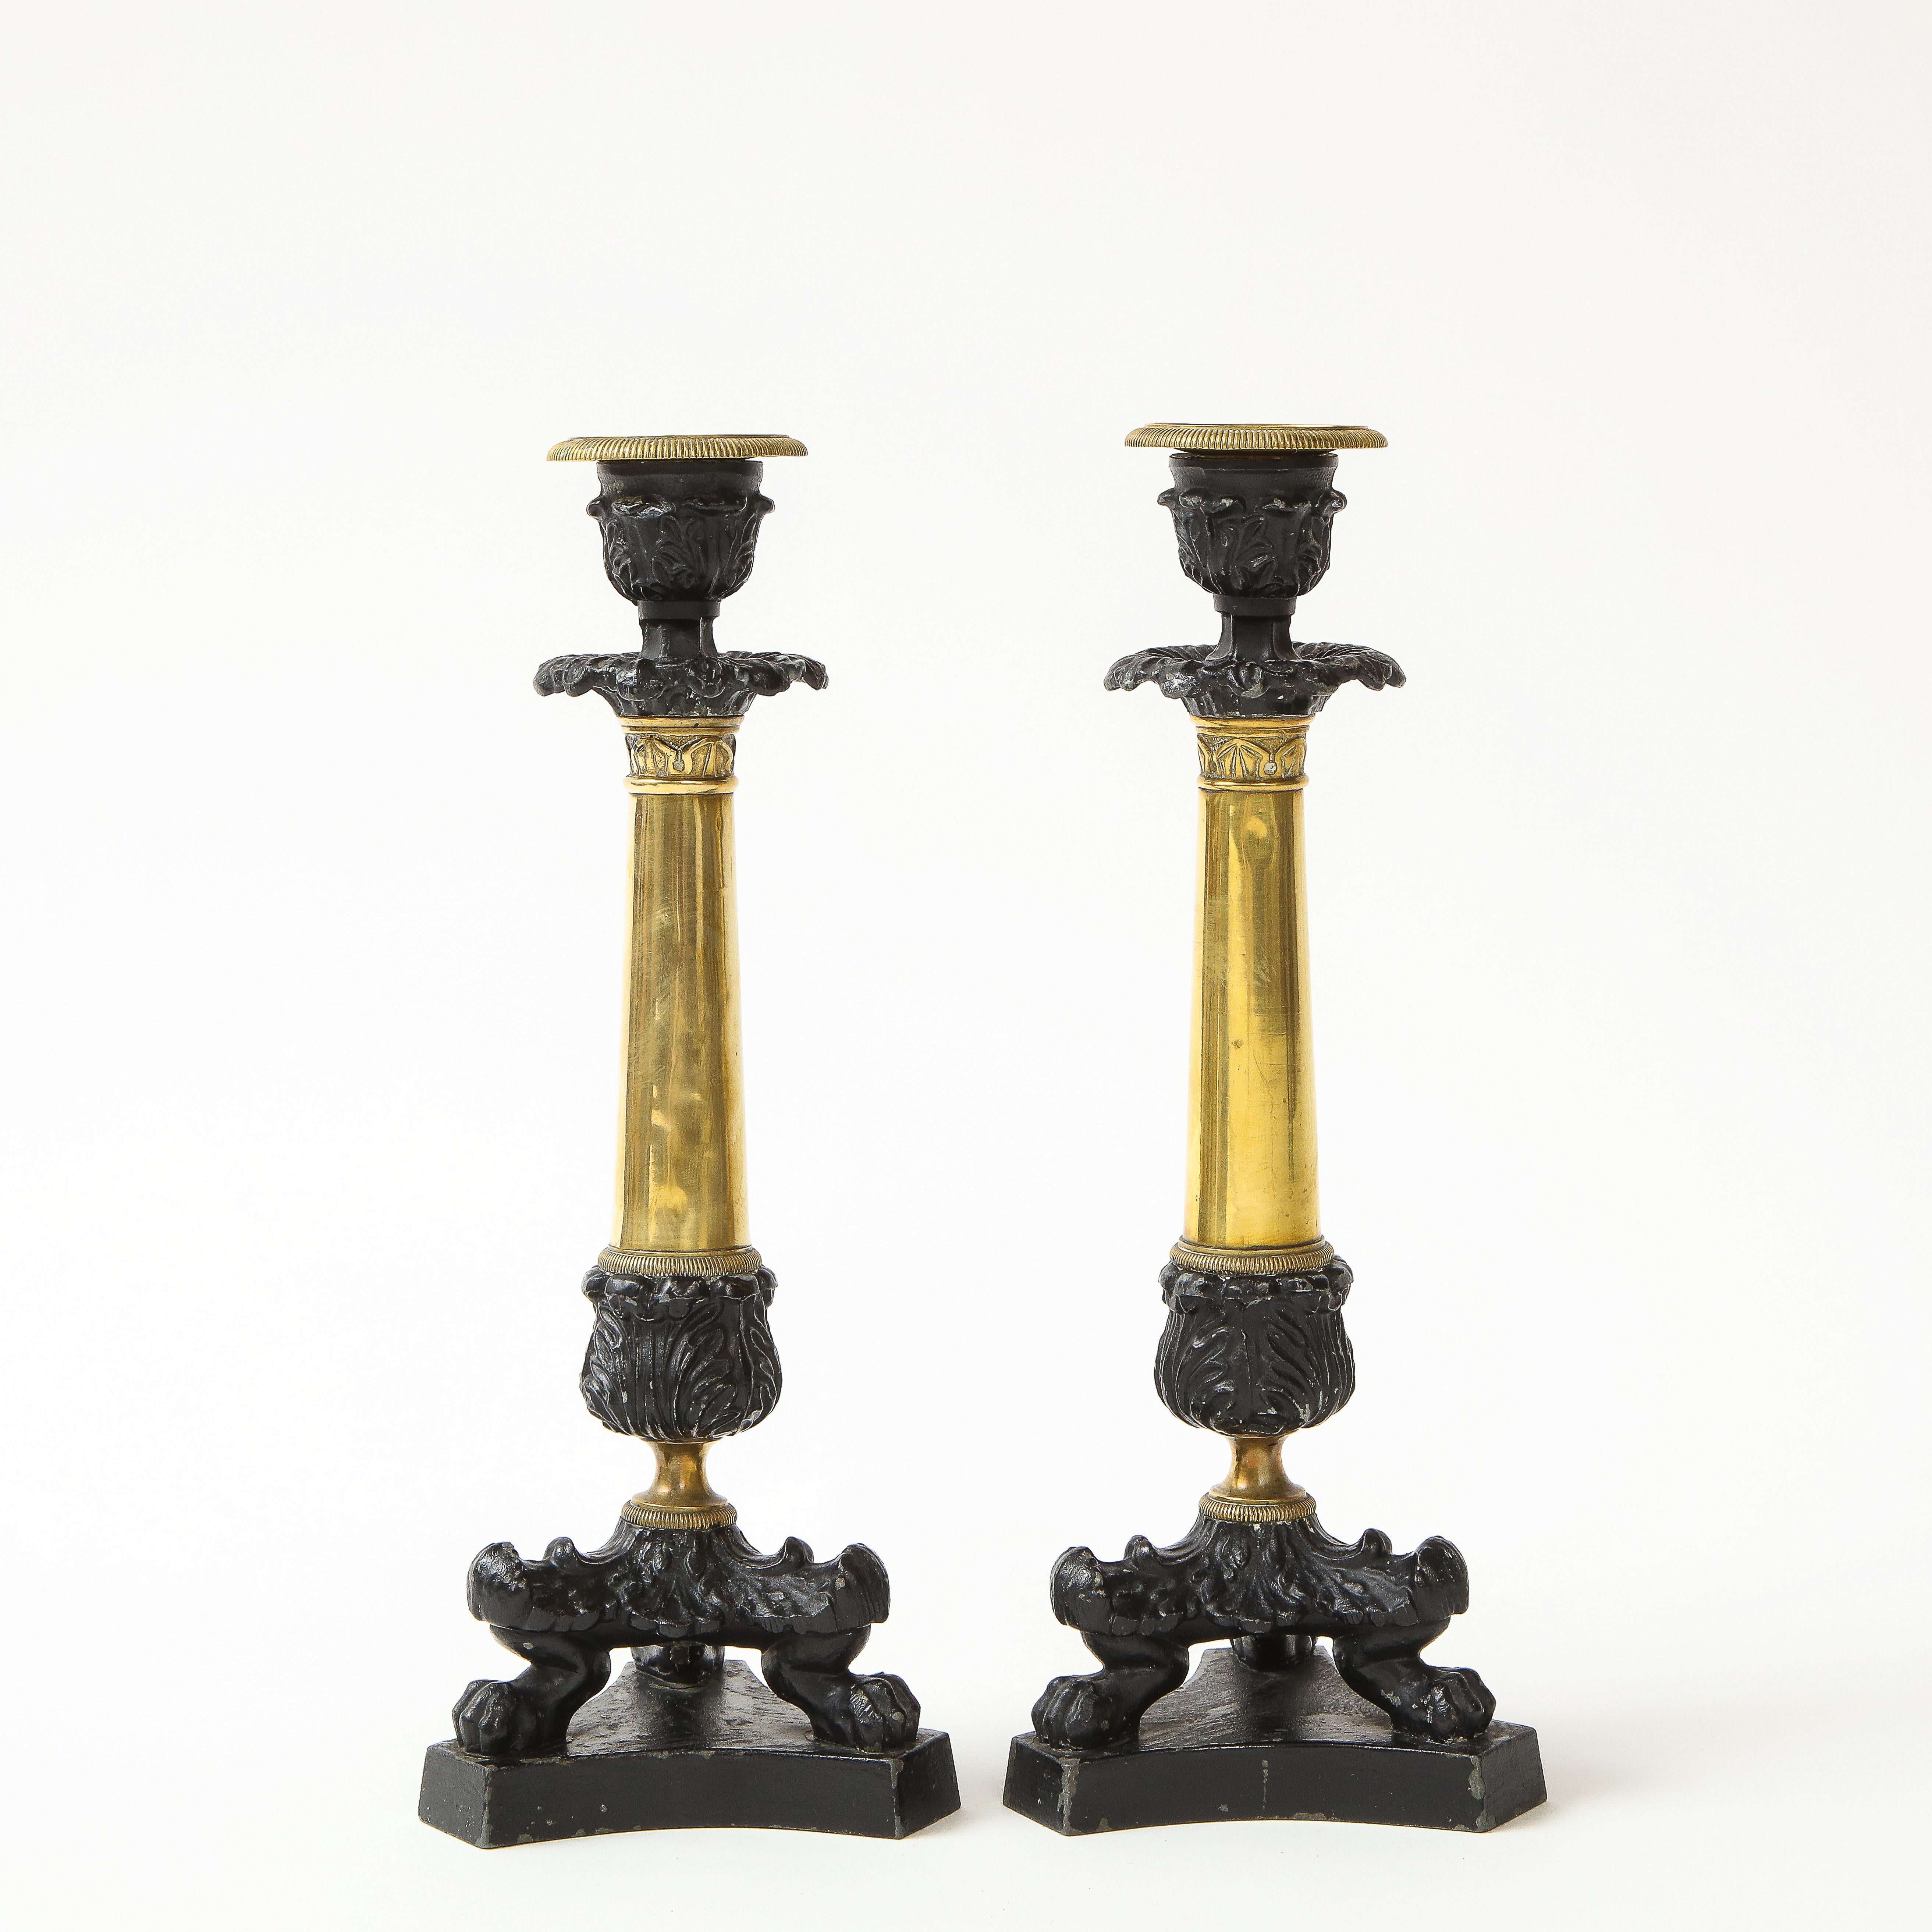 Pair of French Empire Polished Brass and Black-Enameled Cast Iron Candlesticks In Good Condition For Sale In New York, NY